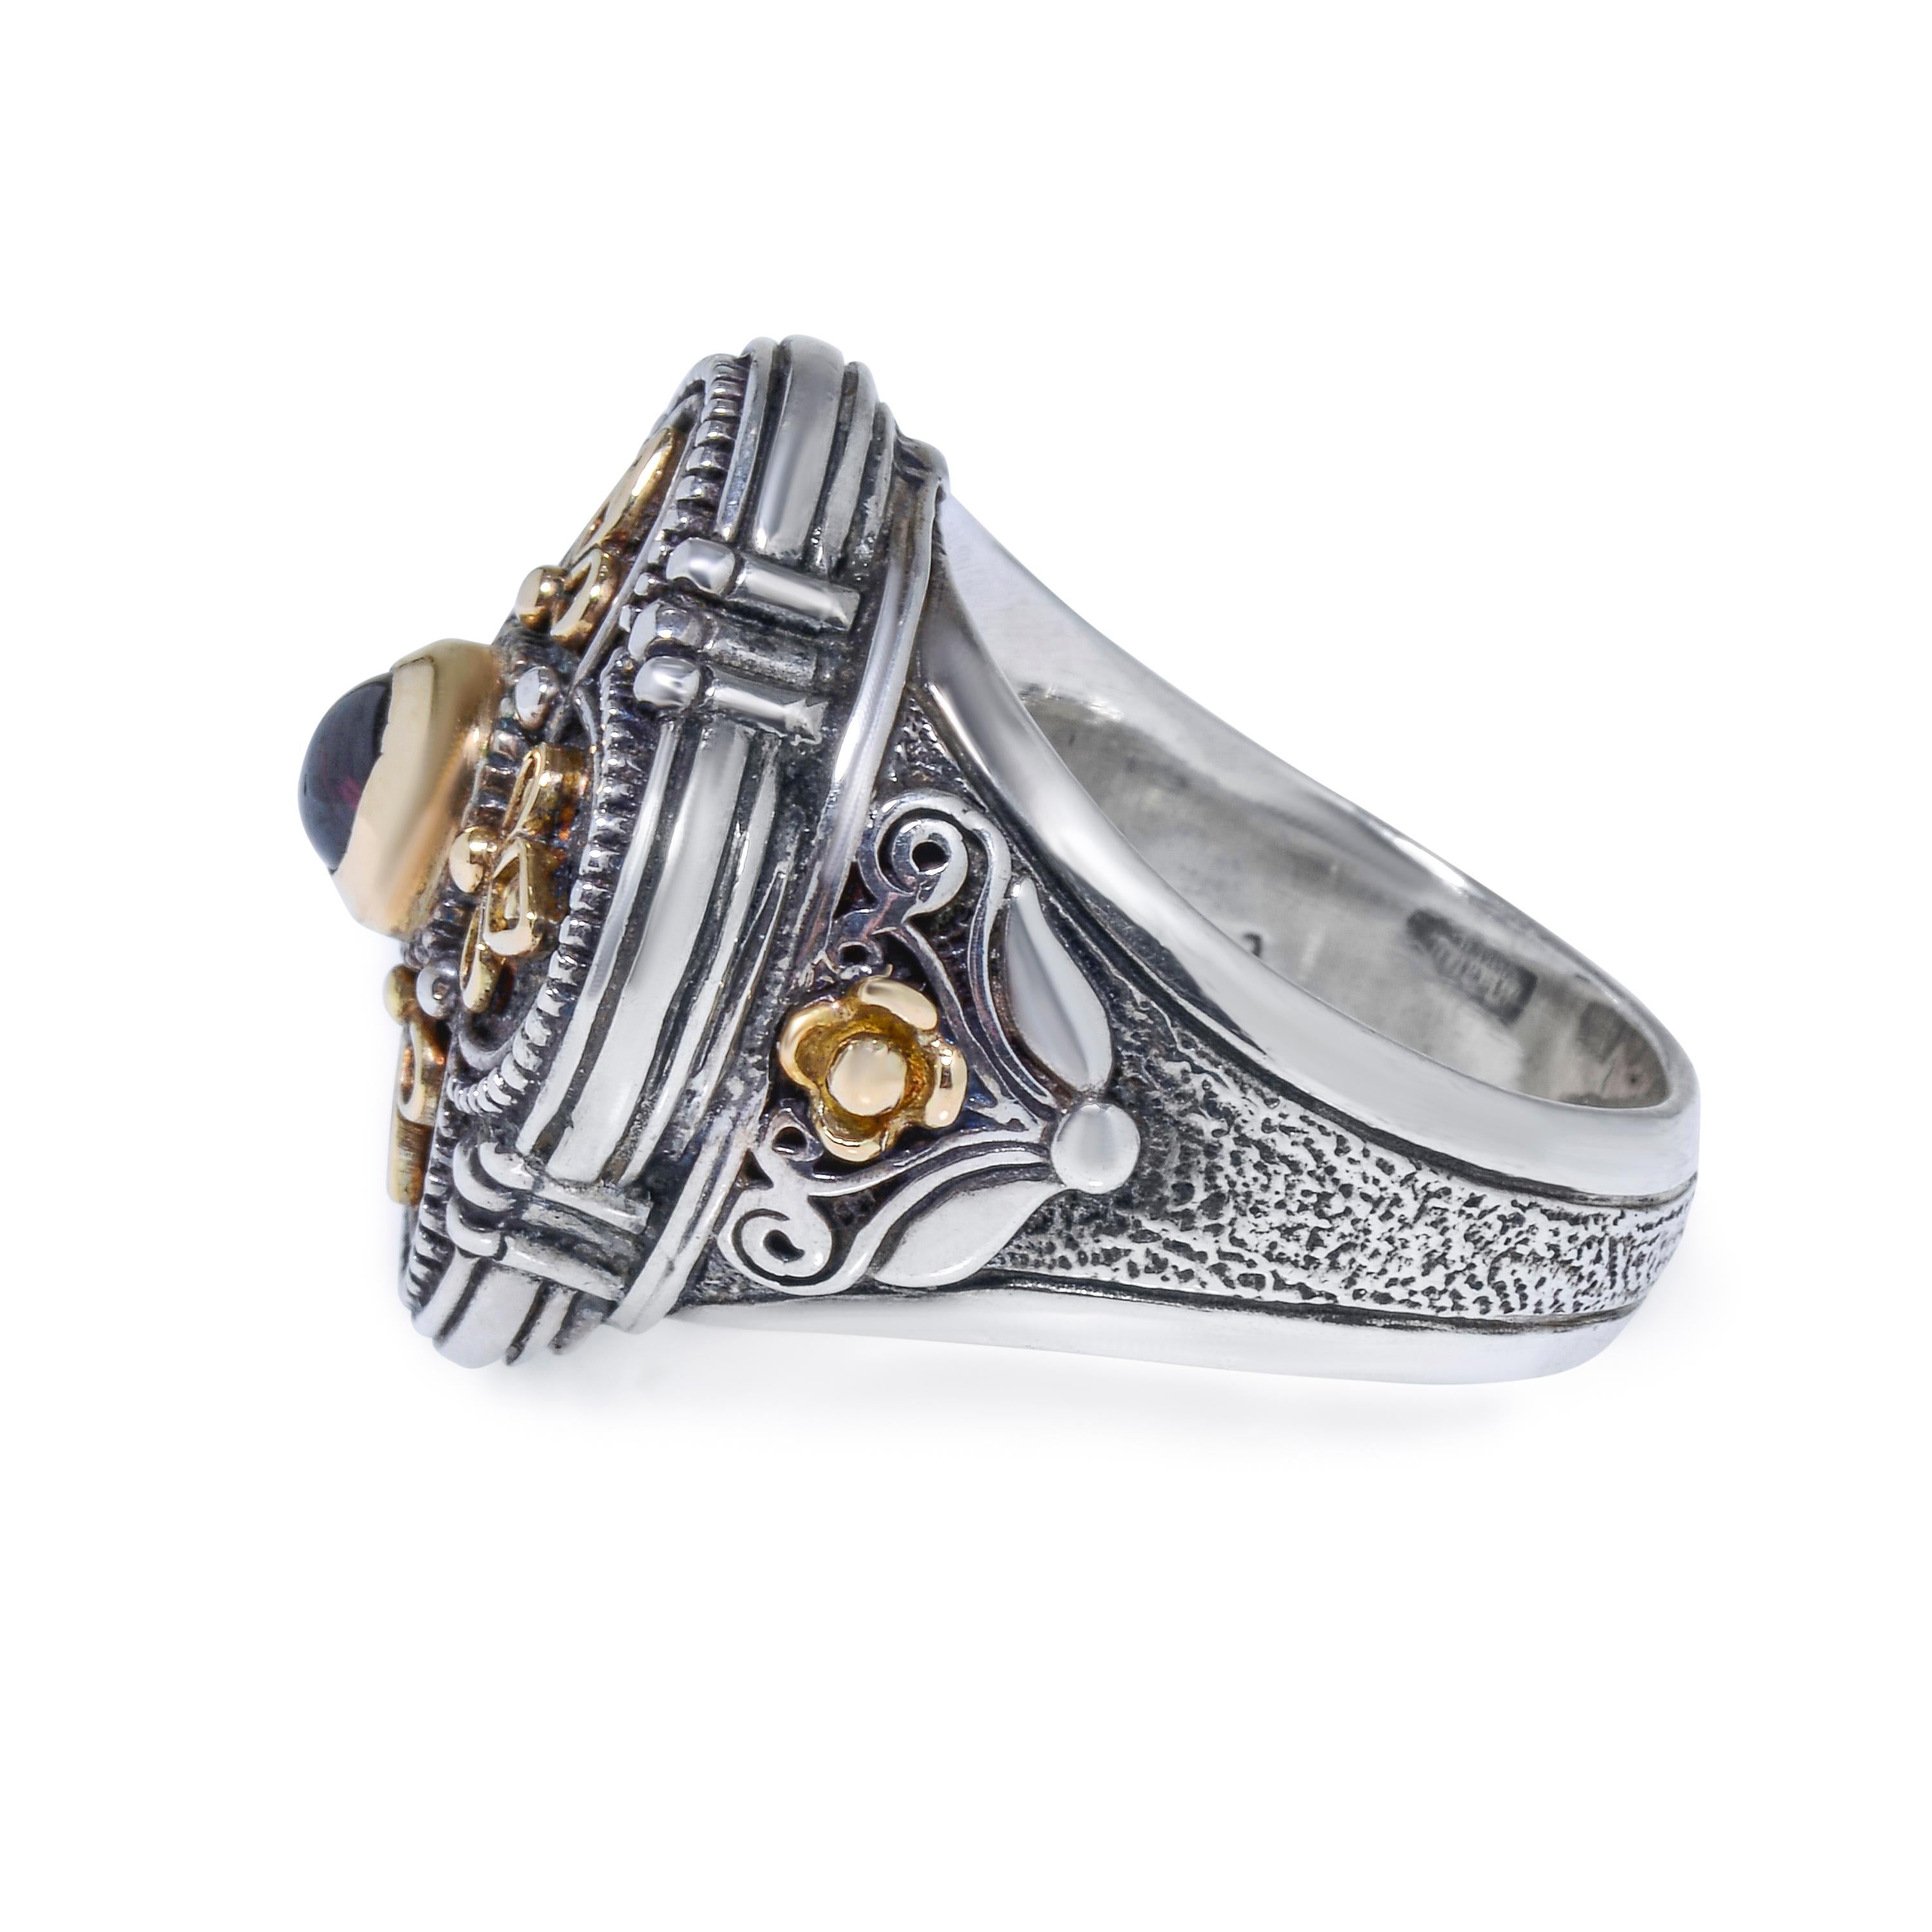 Contemporary Konstantino Sterling Silver, 18K Yellow Gold, and Garnet Ring sz 7.75 For Sale